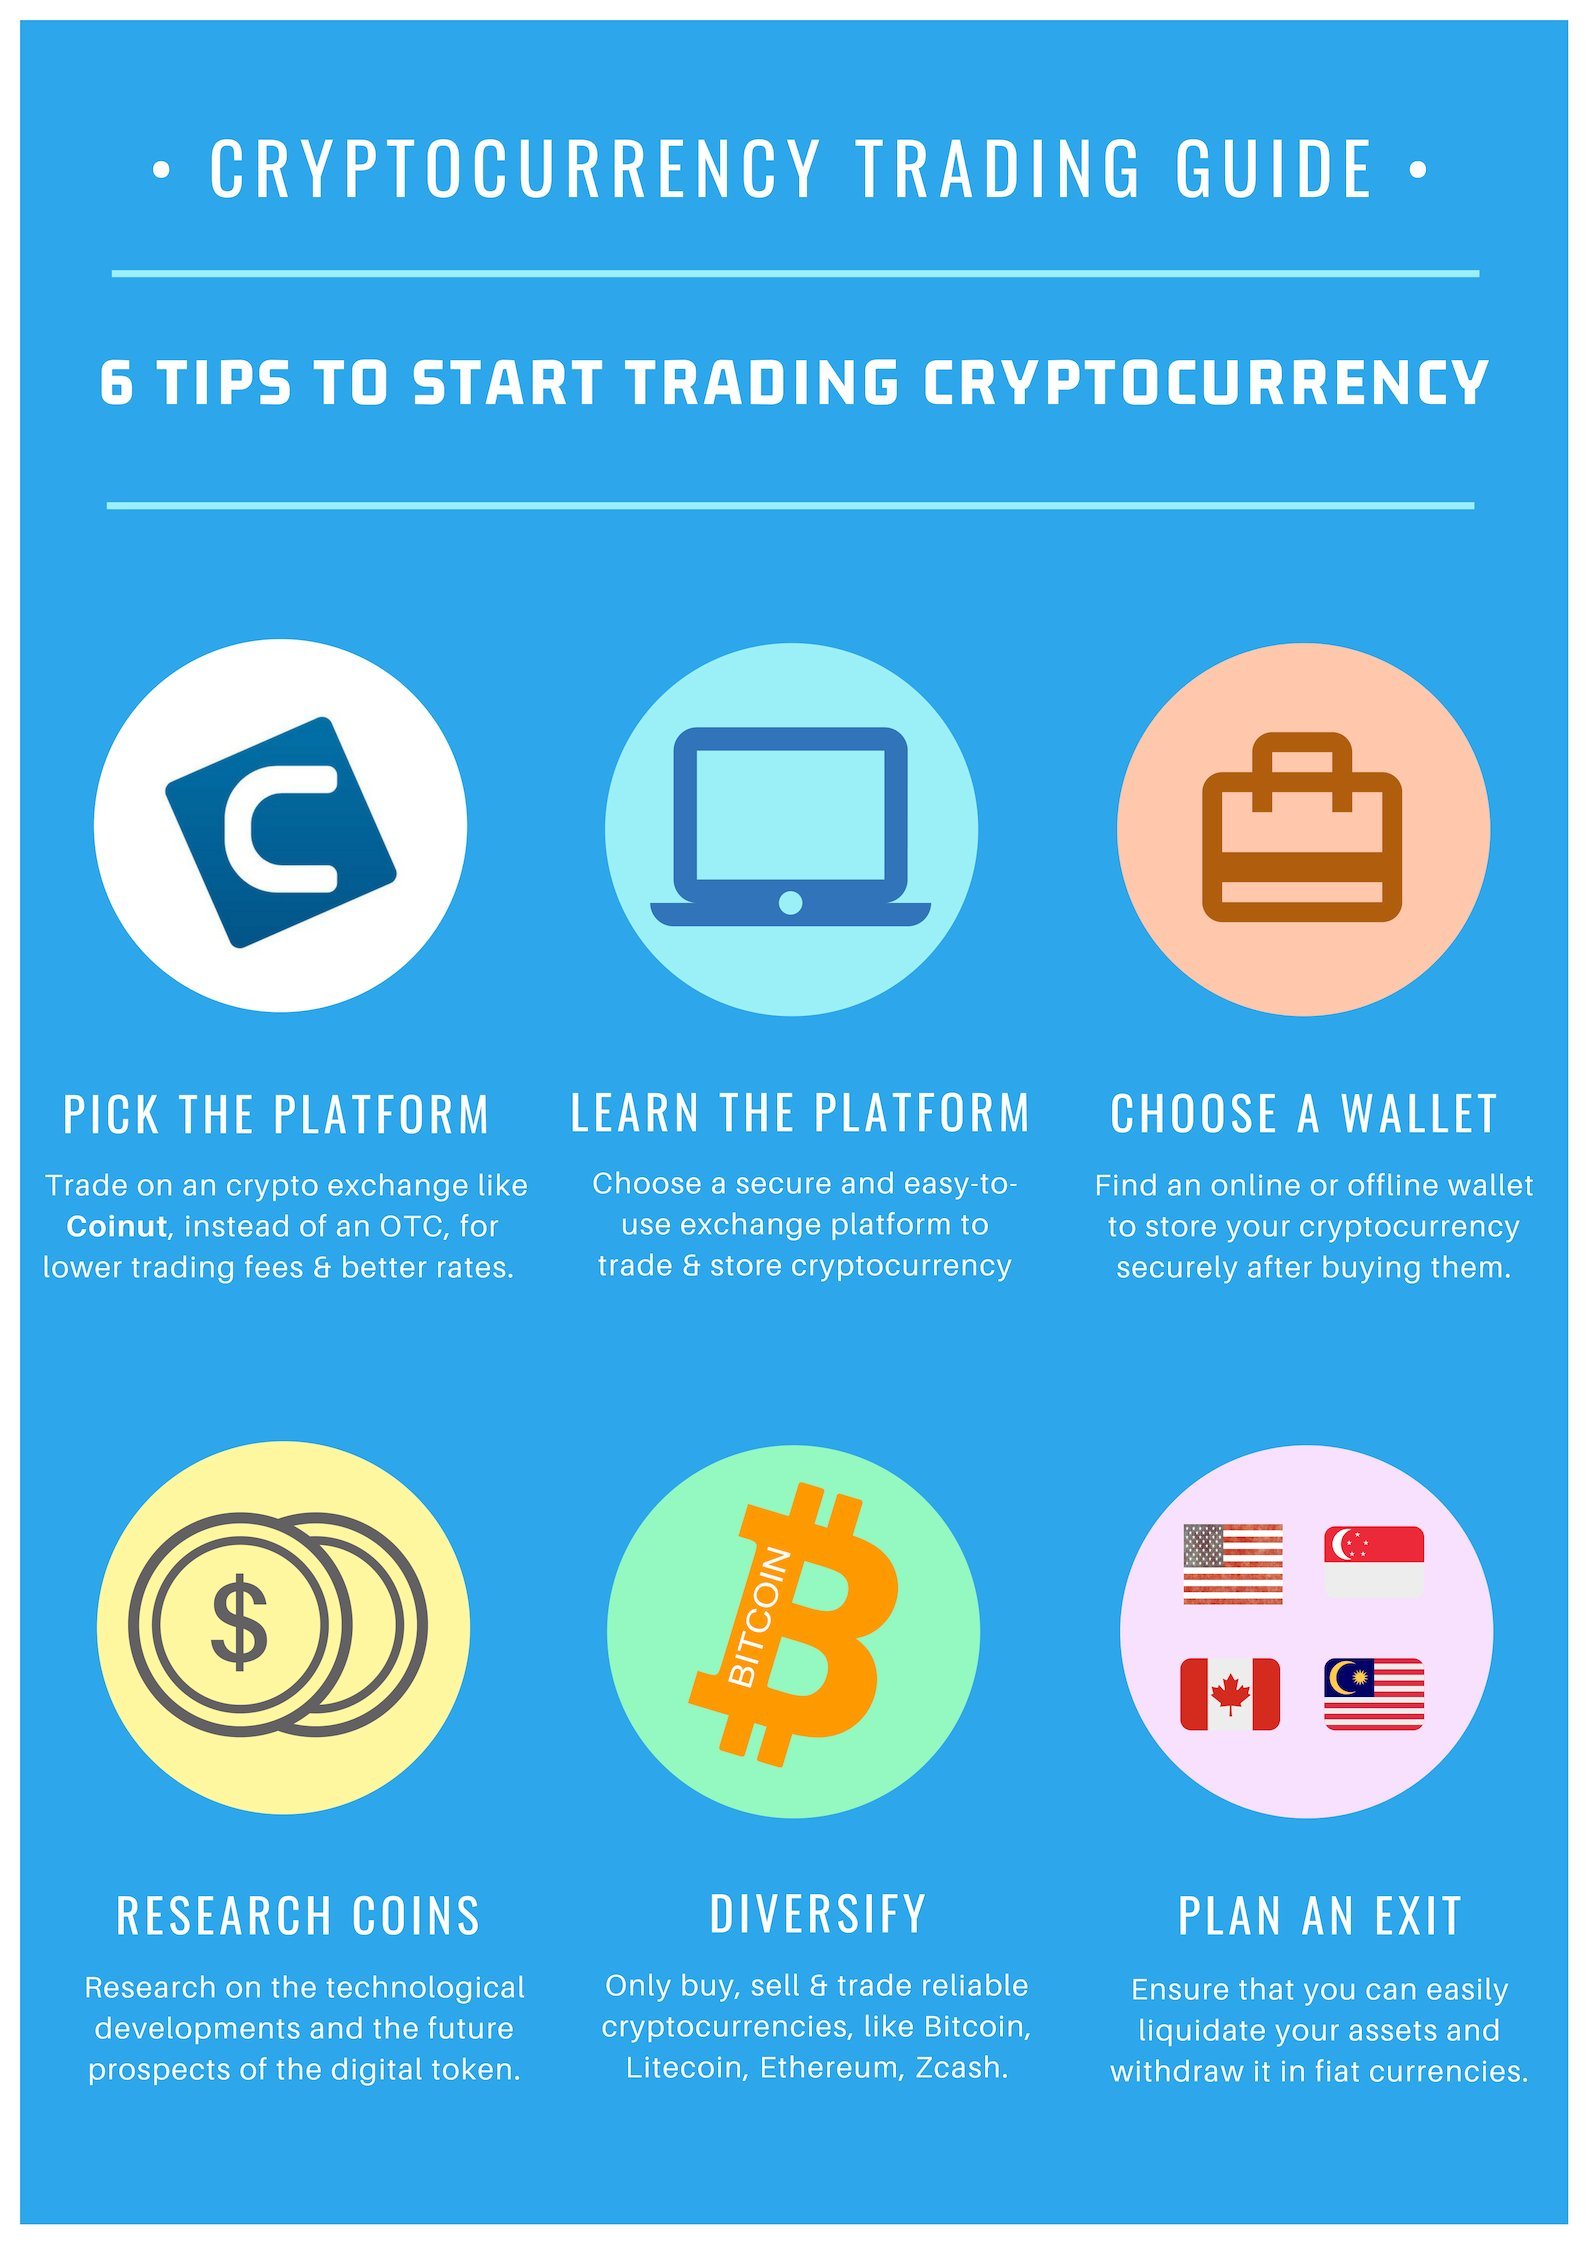 Trading-Guide-2---6-tips-trading-cryptocurrency-1